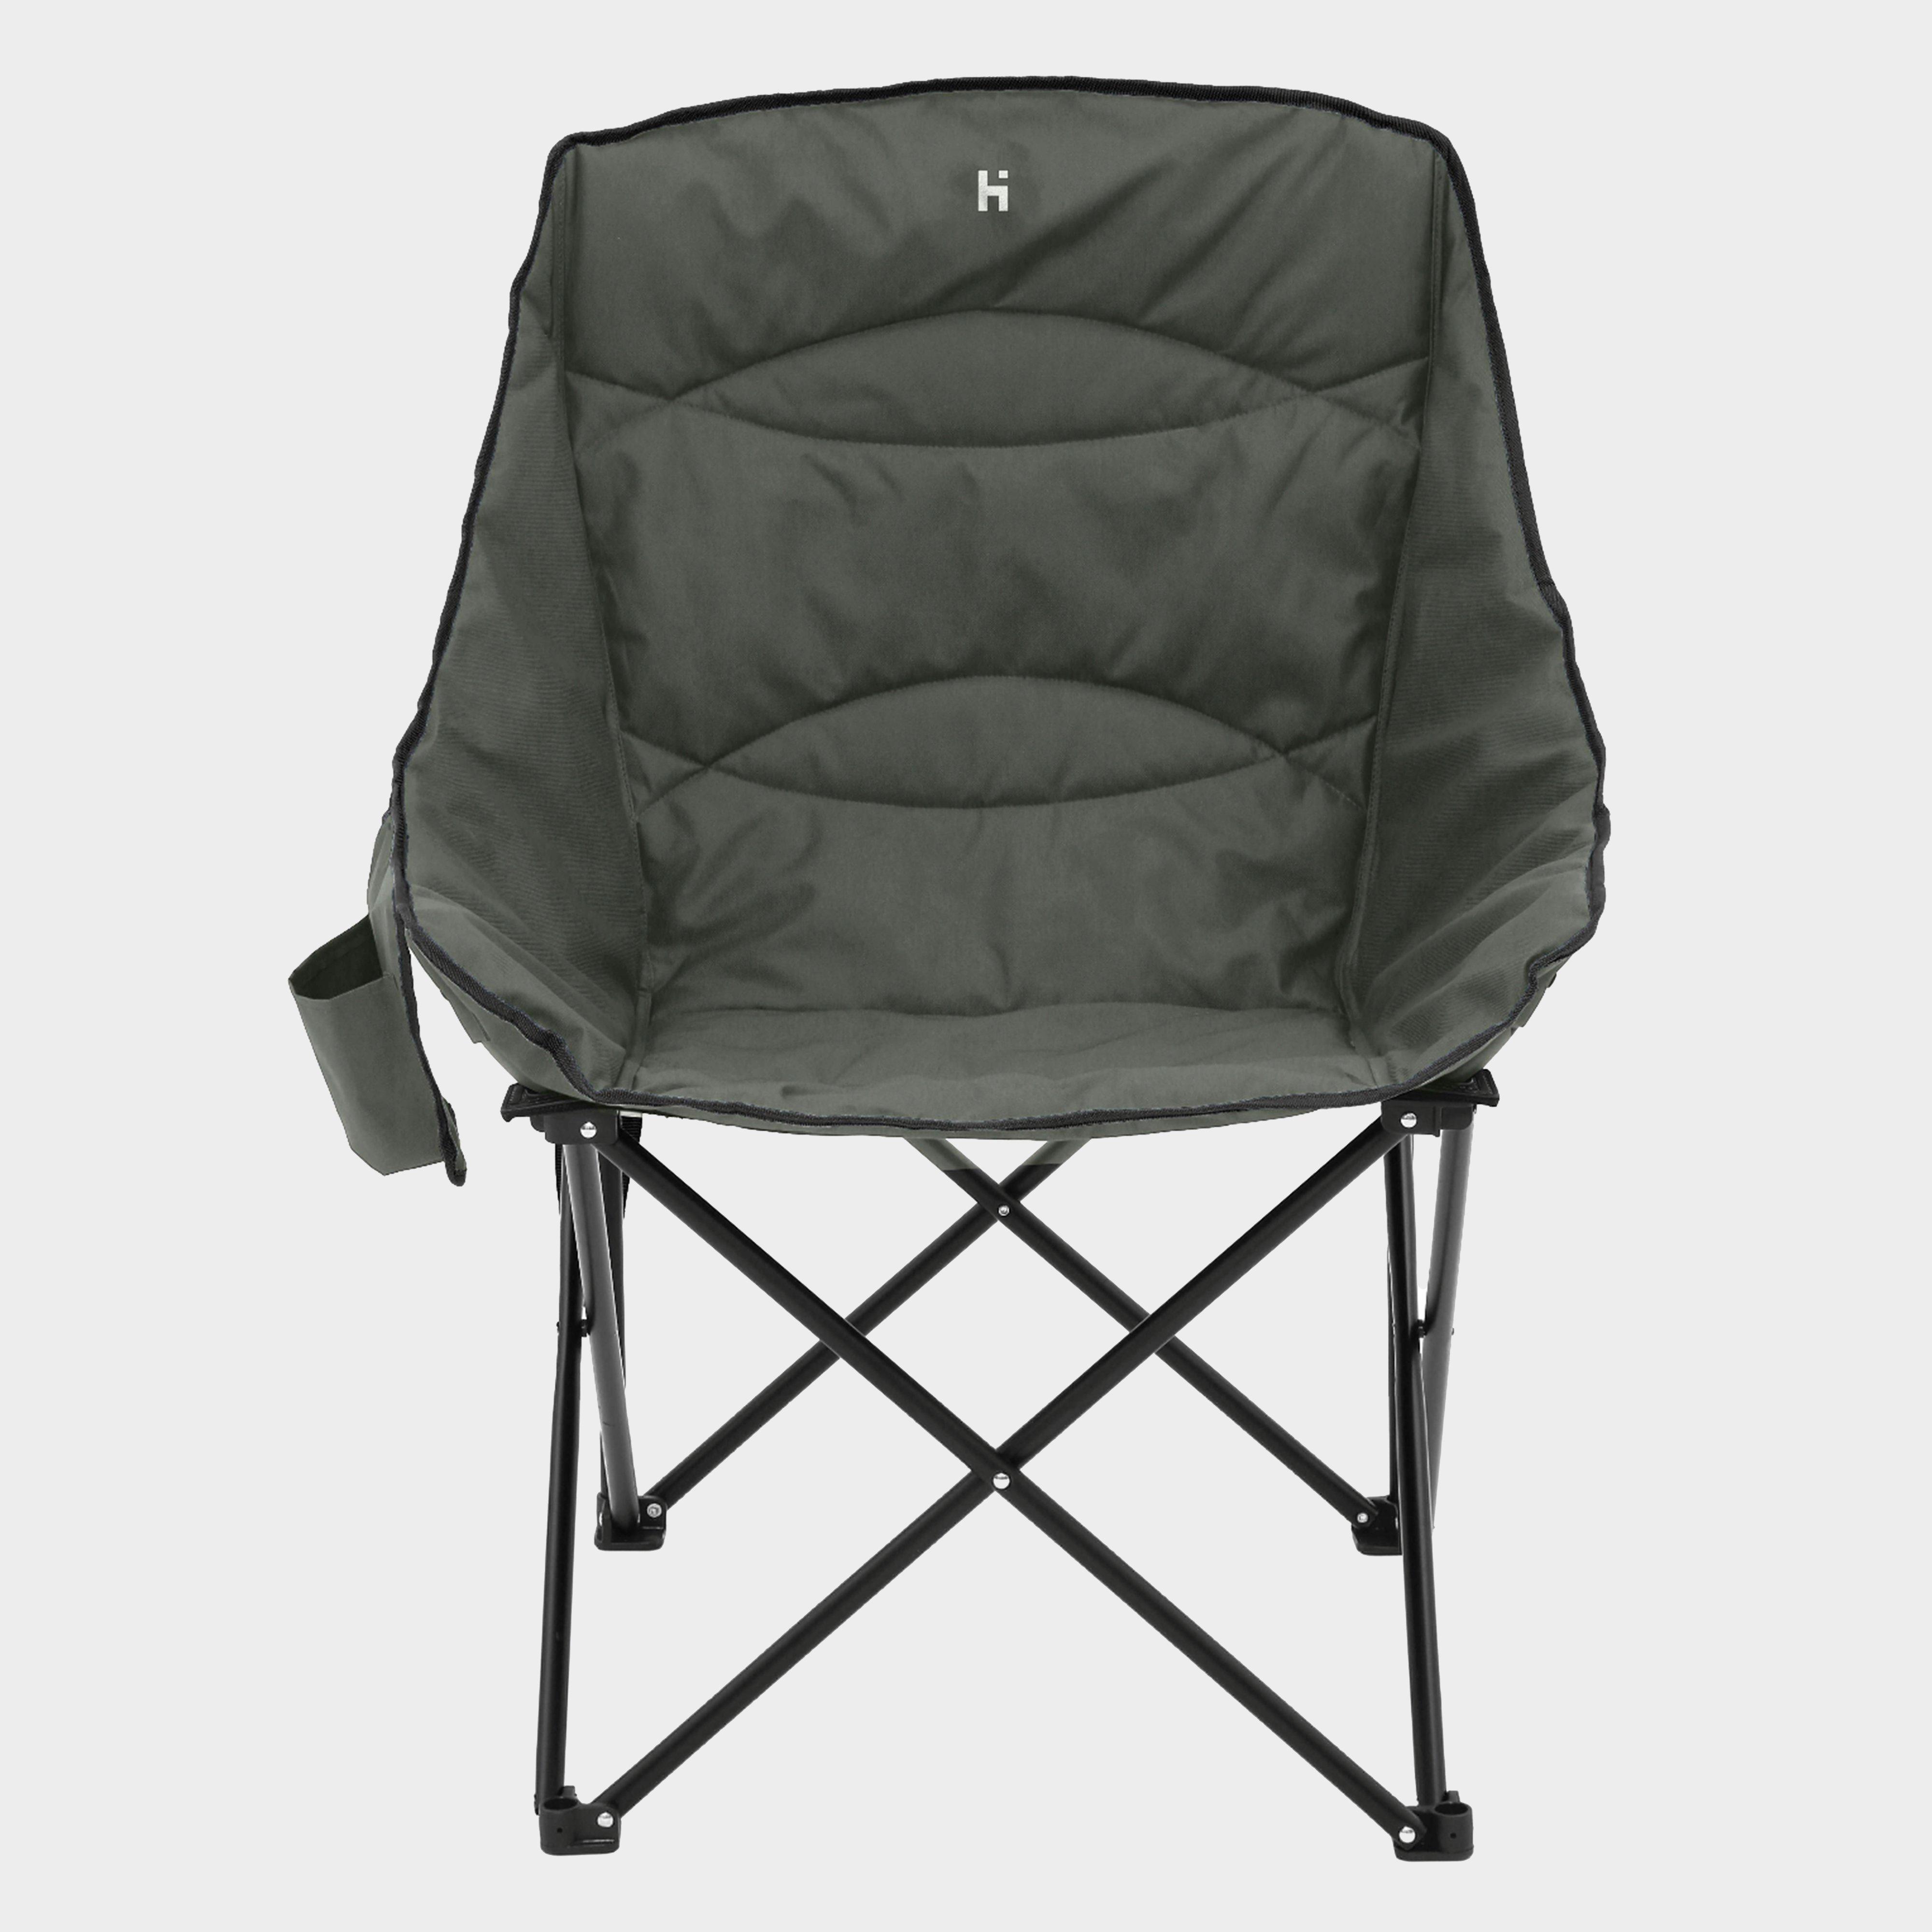 Hi-gear Vegas Xl Deluxe Quilted Chair  Grey